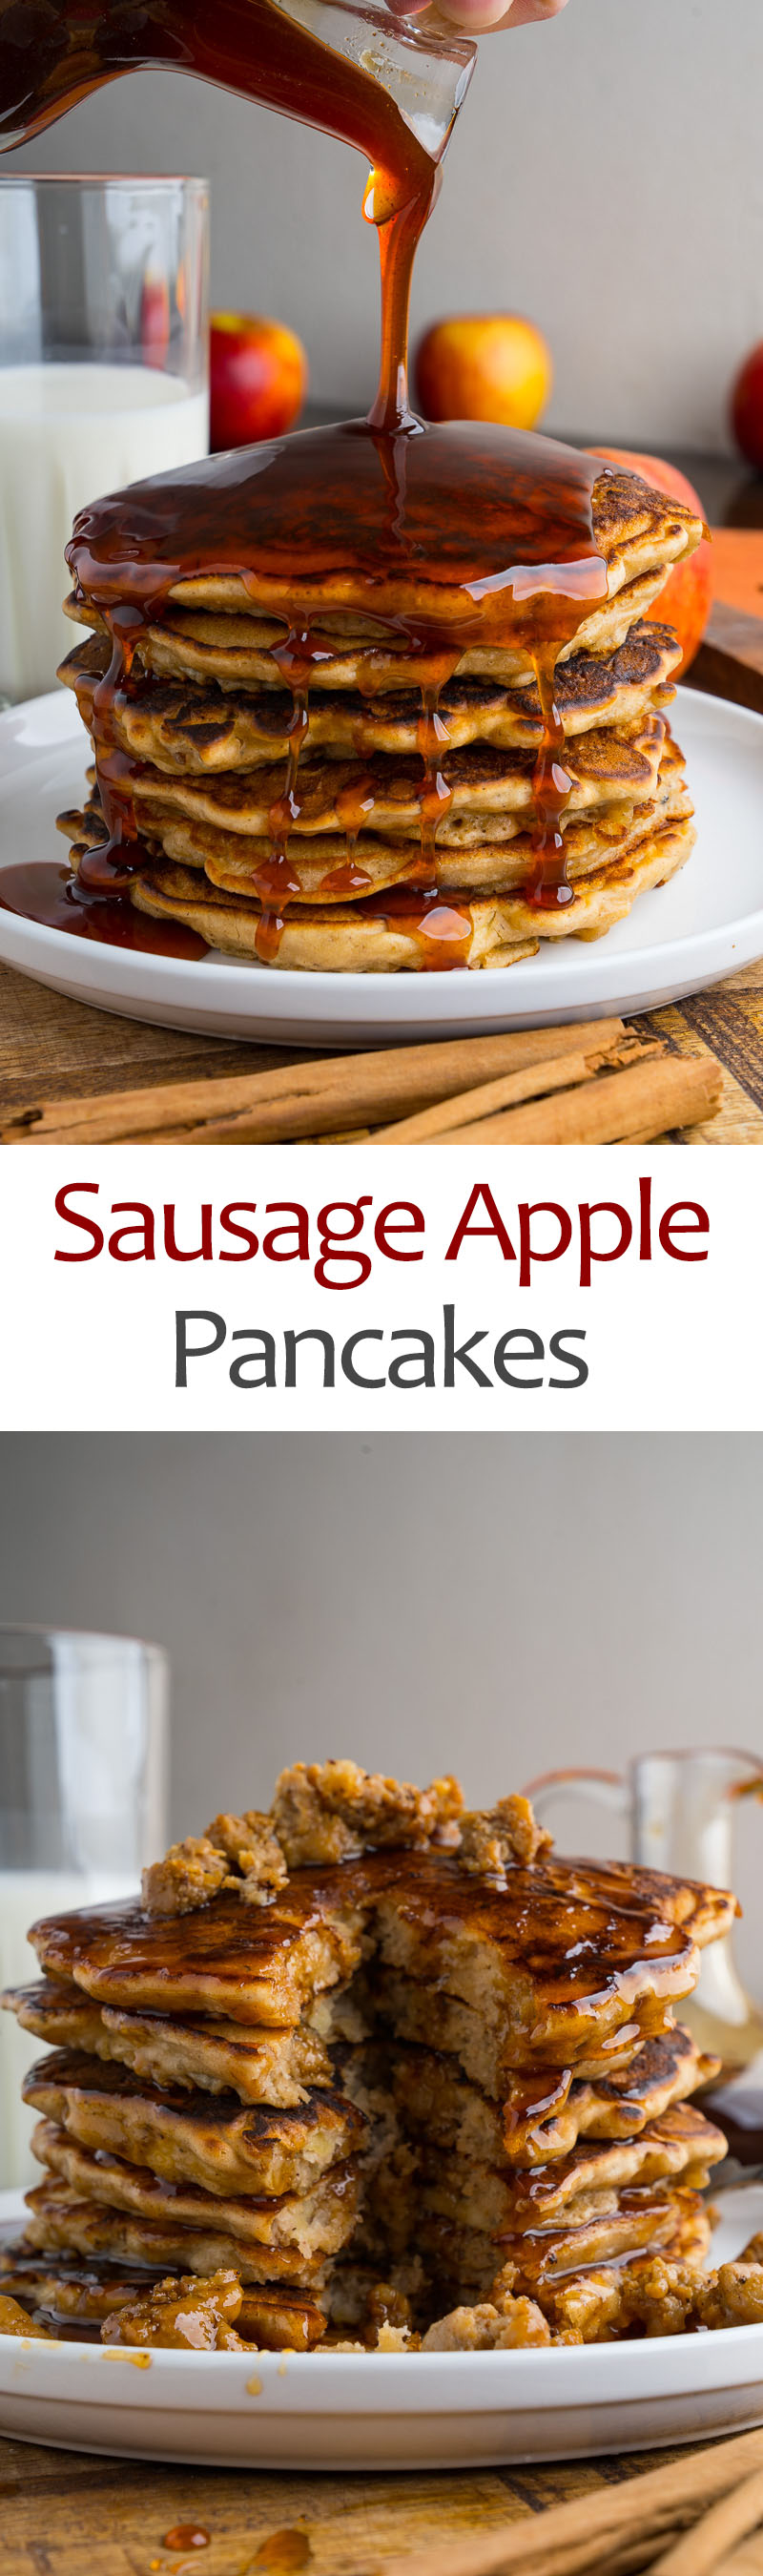 Sausage Apple Pancakes with Apple Cider Syrup